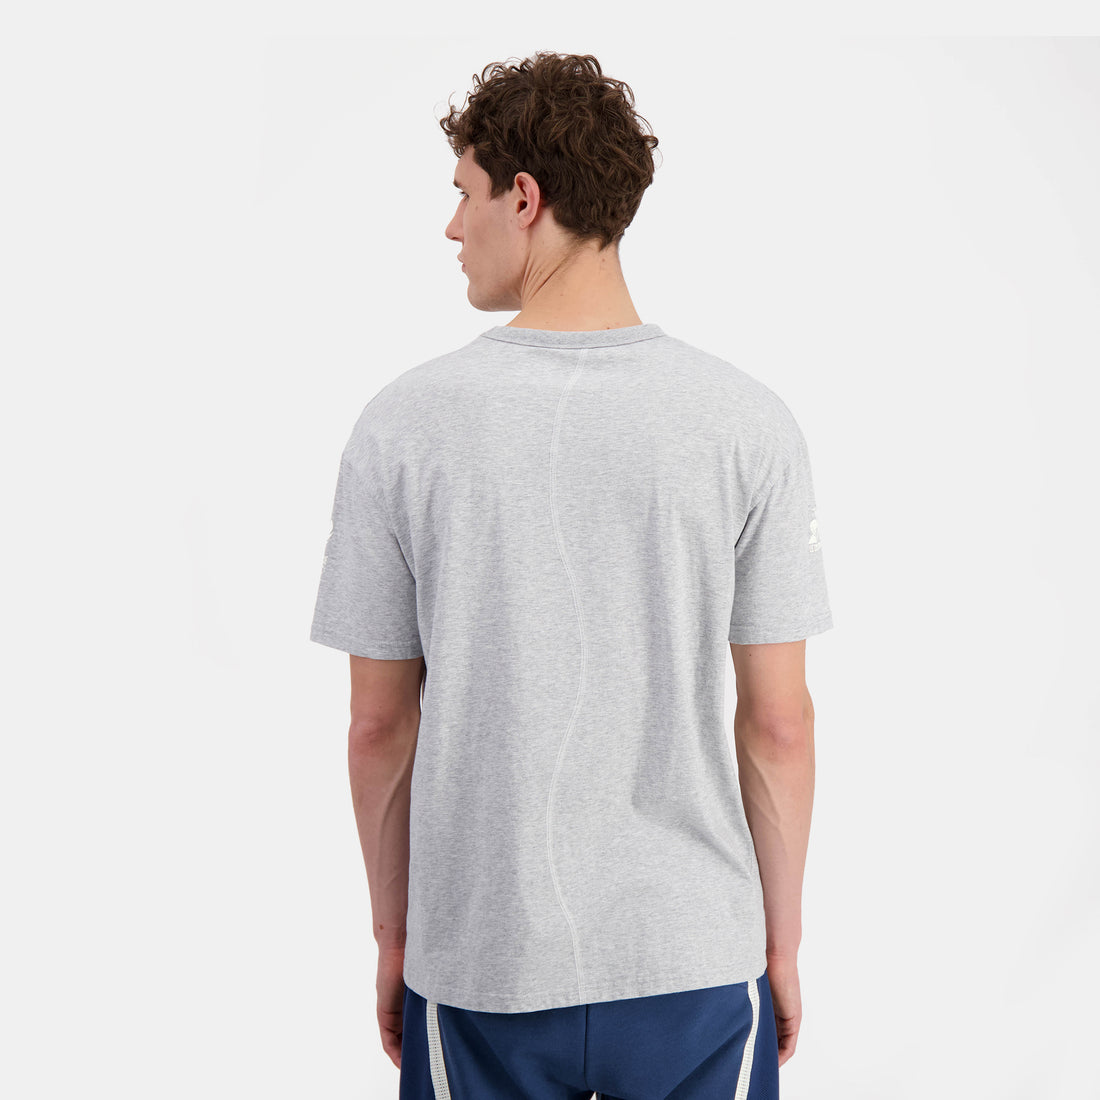 2410385-EFRO 24 Tee SS N°3 M gris chiné clair  | Maglietta Uomo